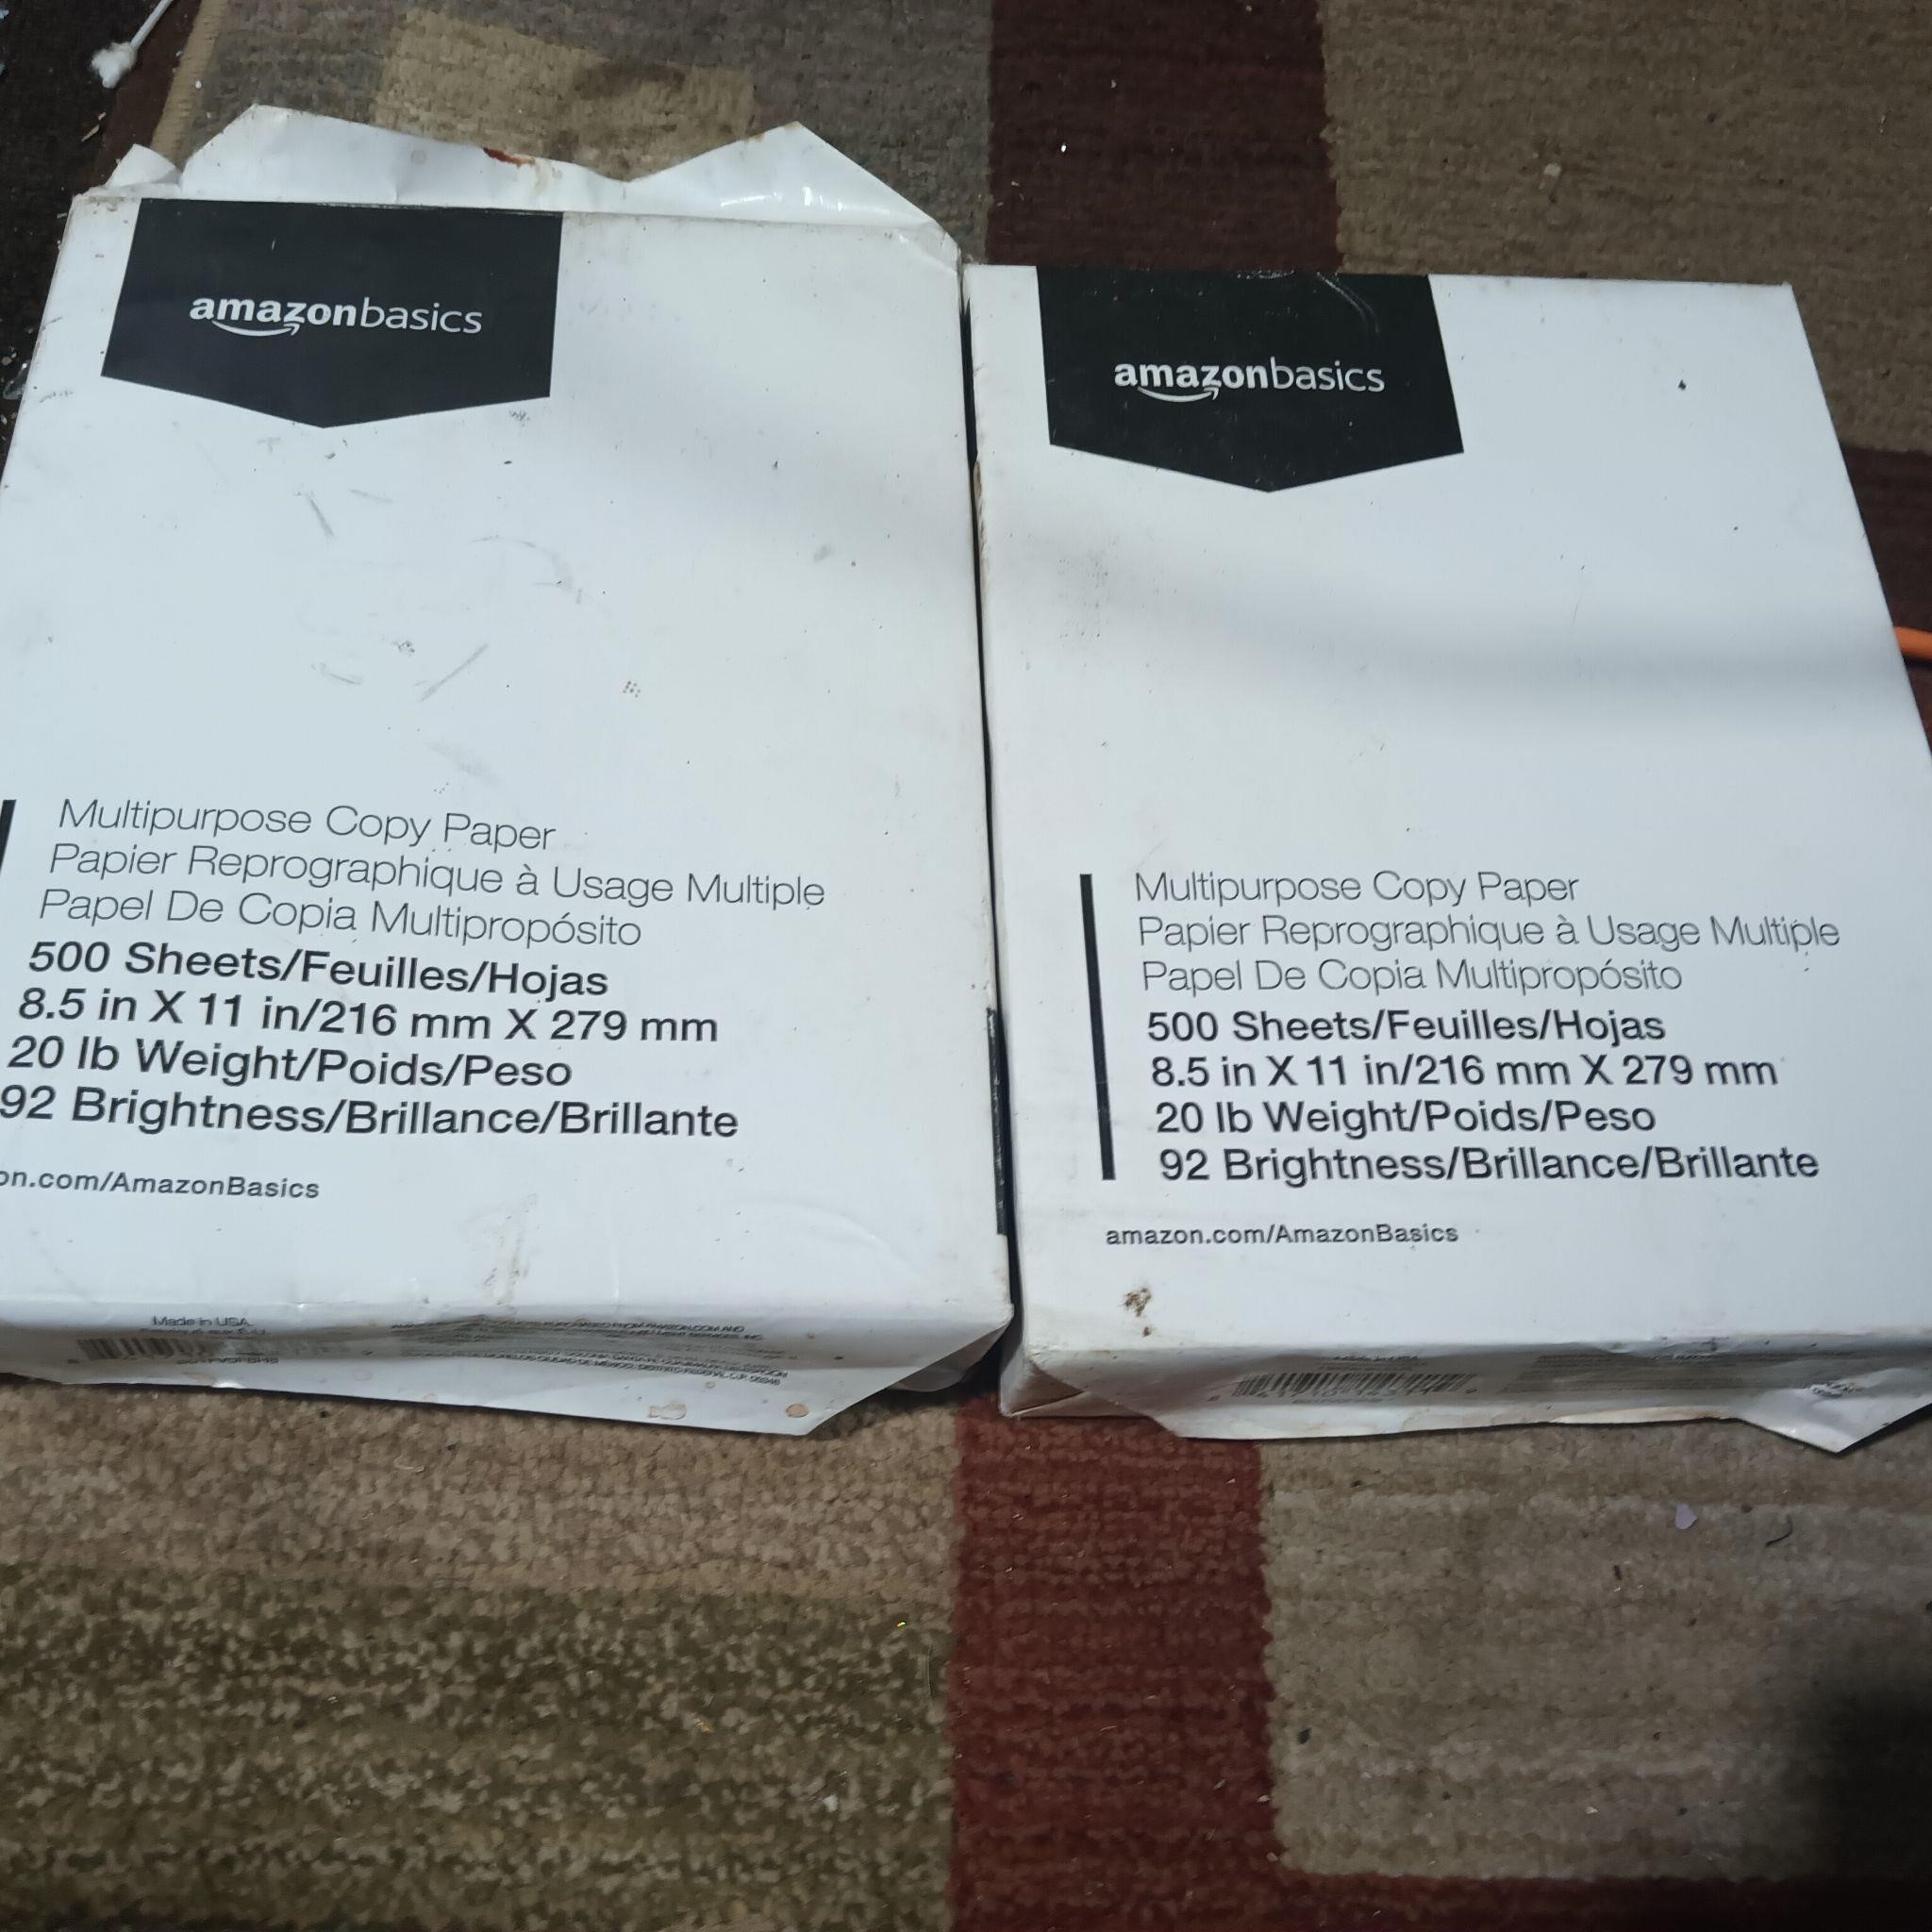 2 reams of Amazon paper (new unclean package)